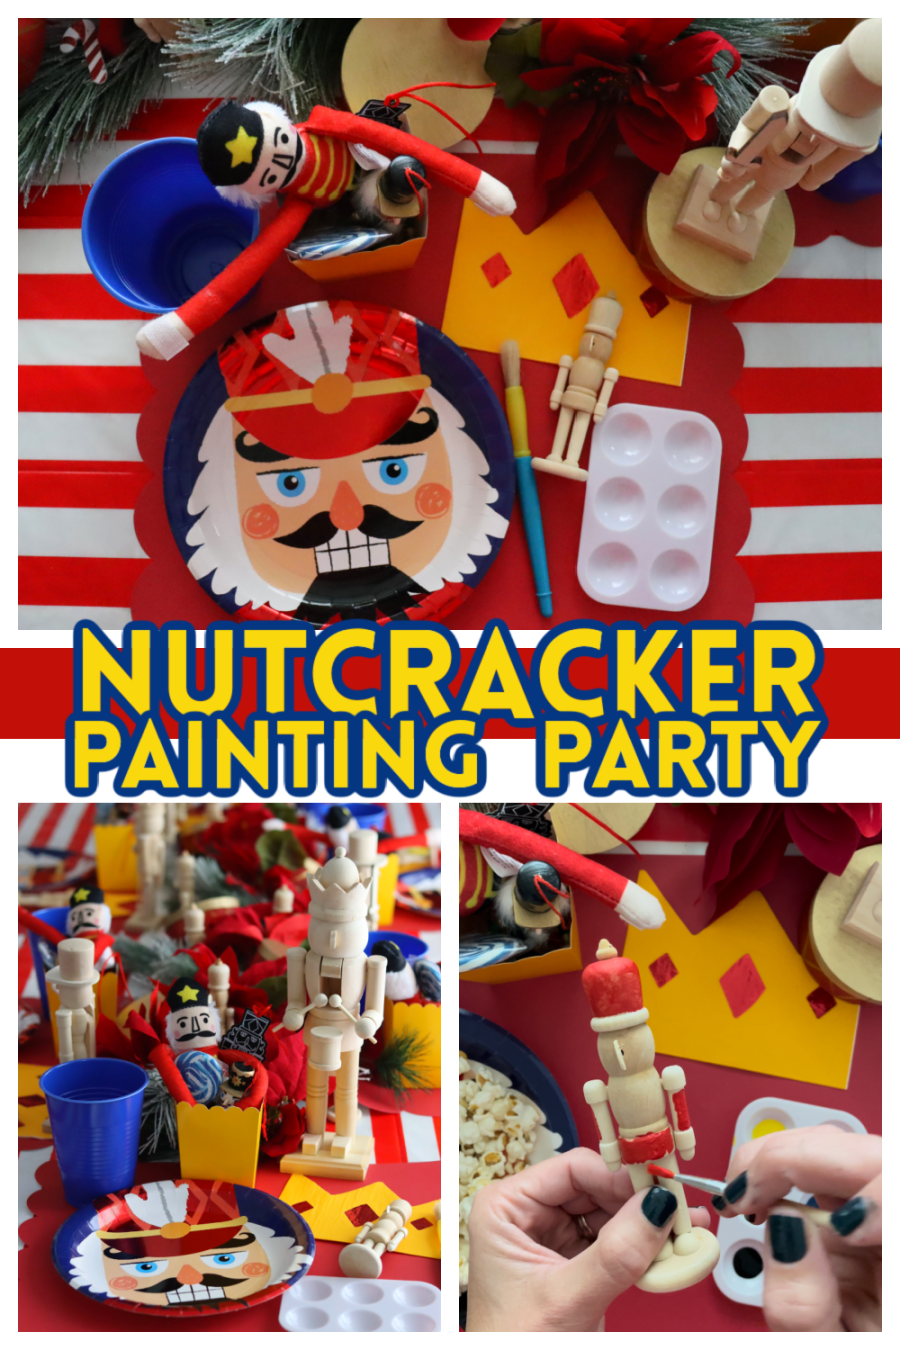 nutcracker painting party